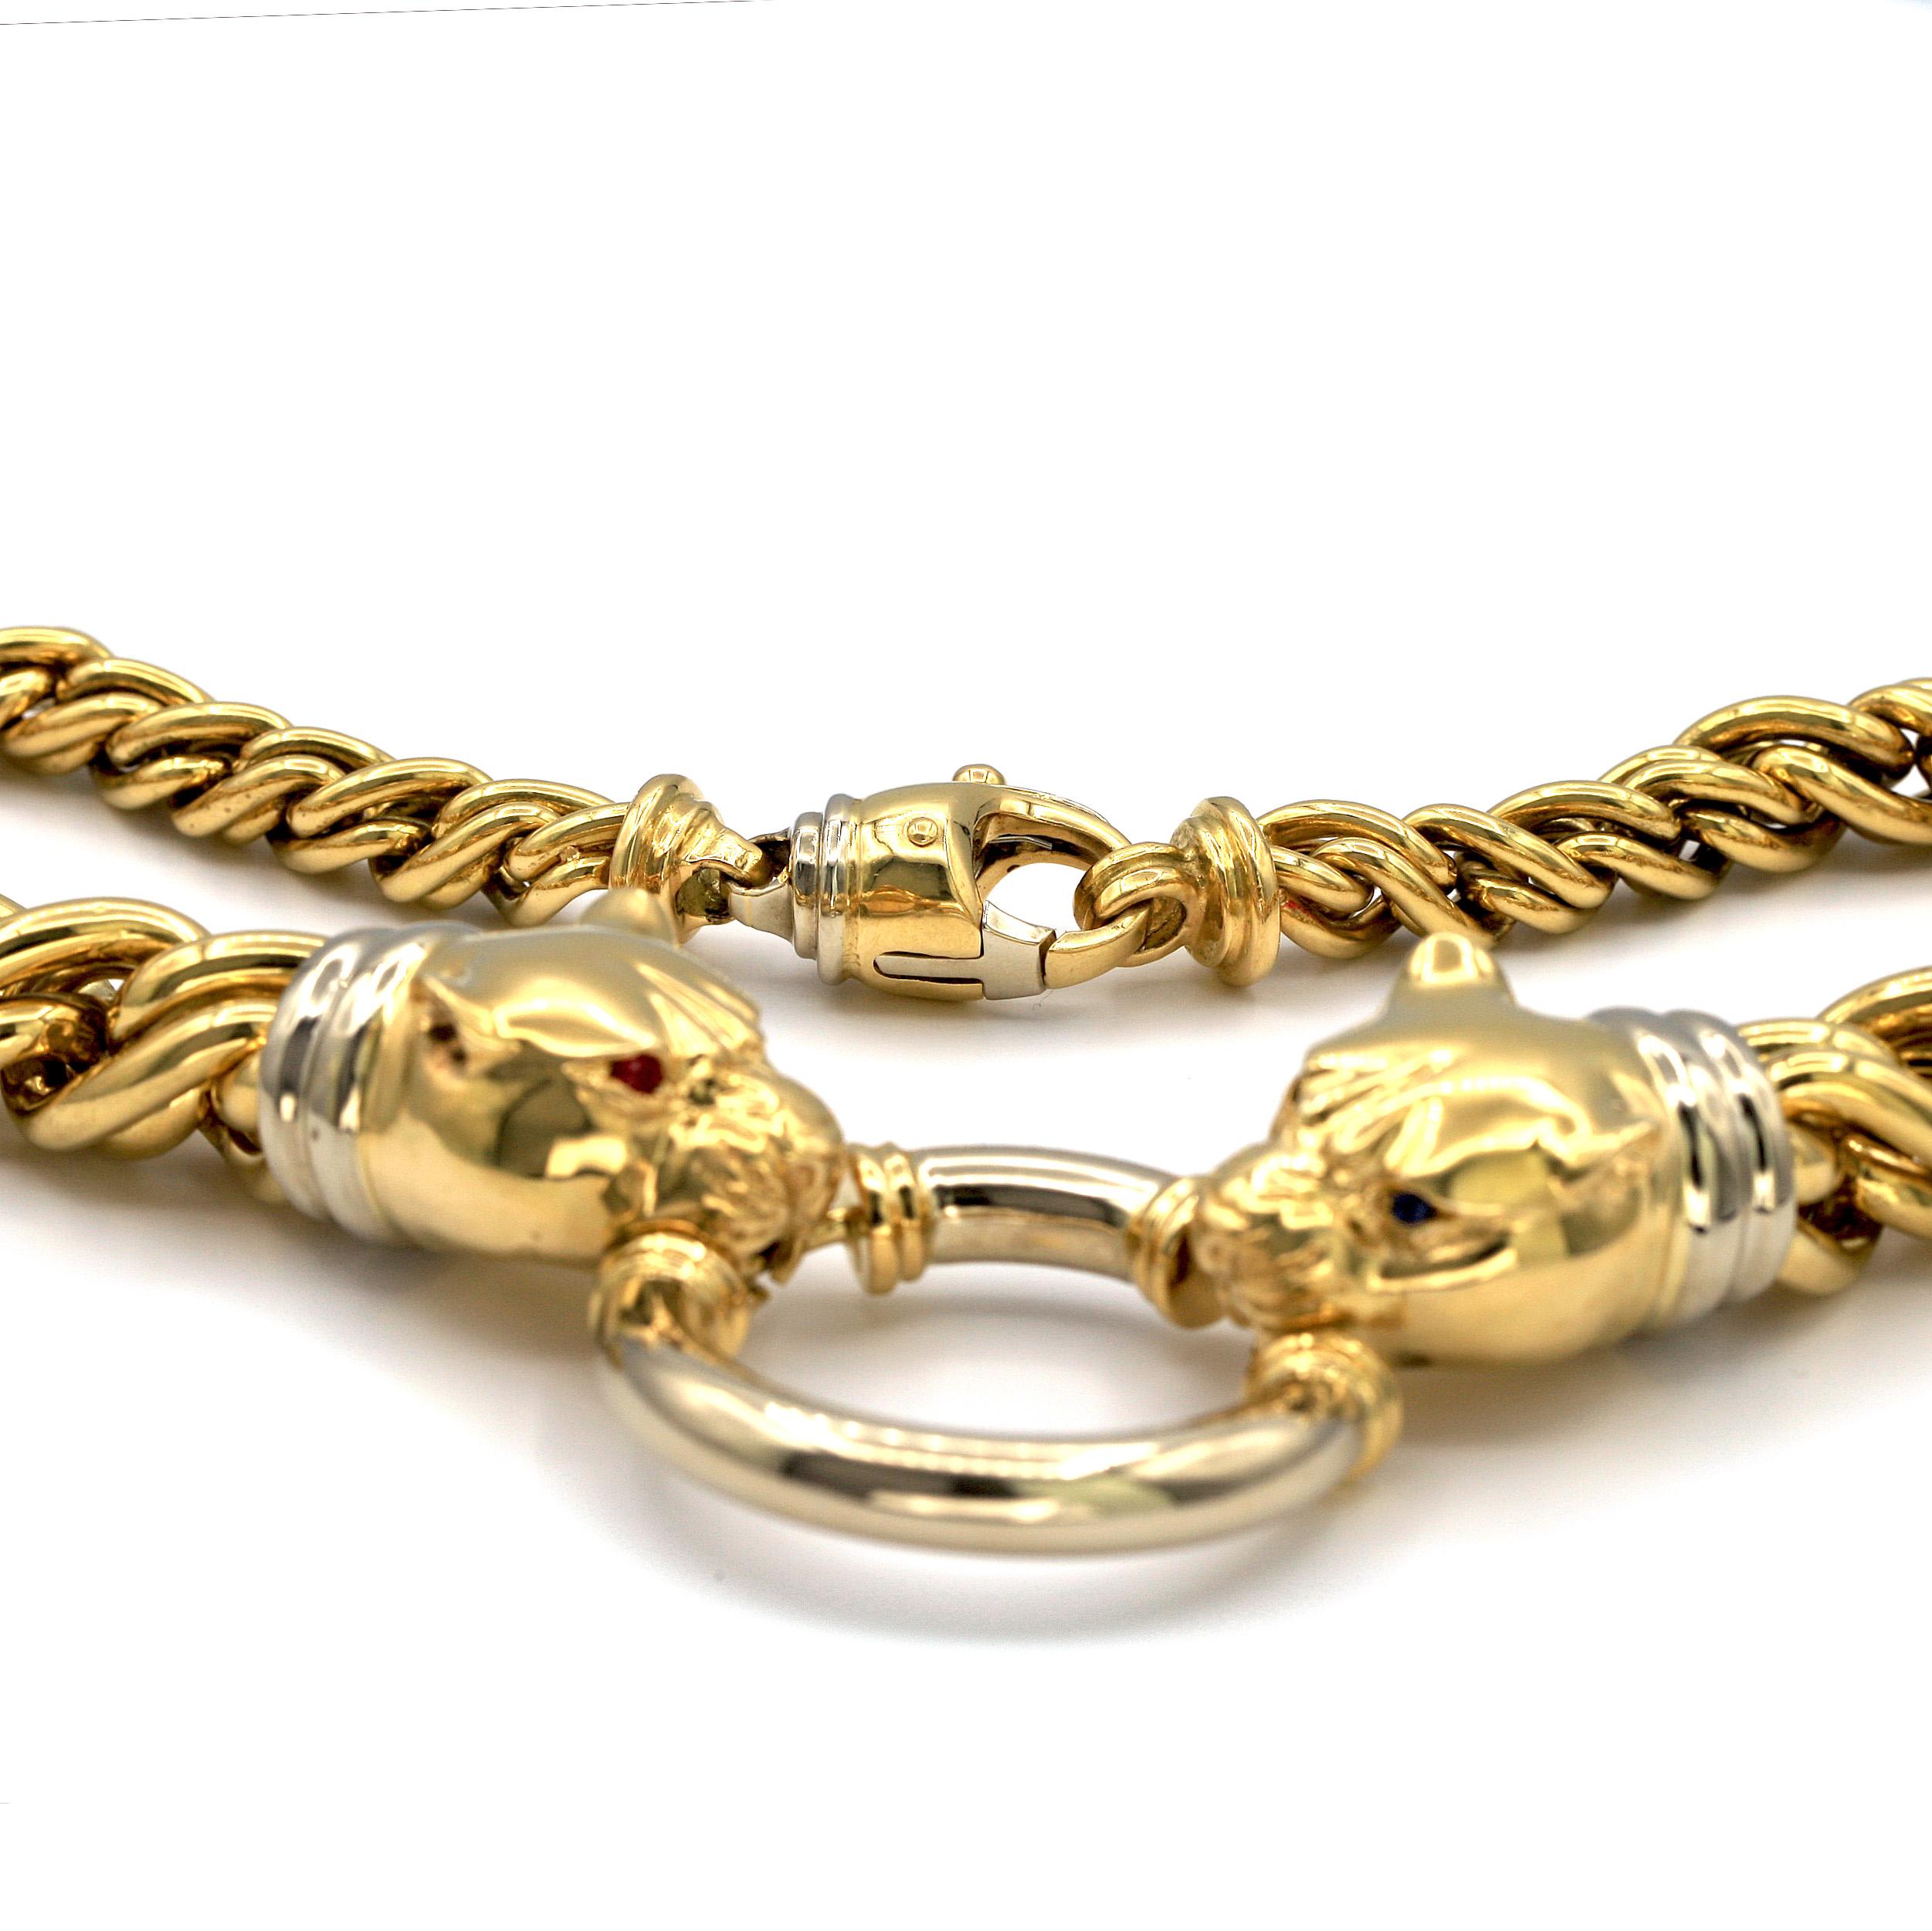 Cartier Inspired Necklace in 18 Karat Yellow Gold with Sapphire and Rubies 1